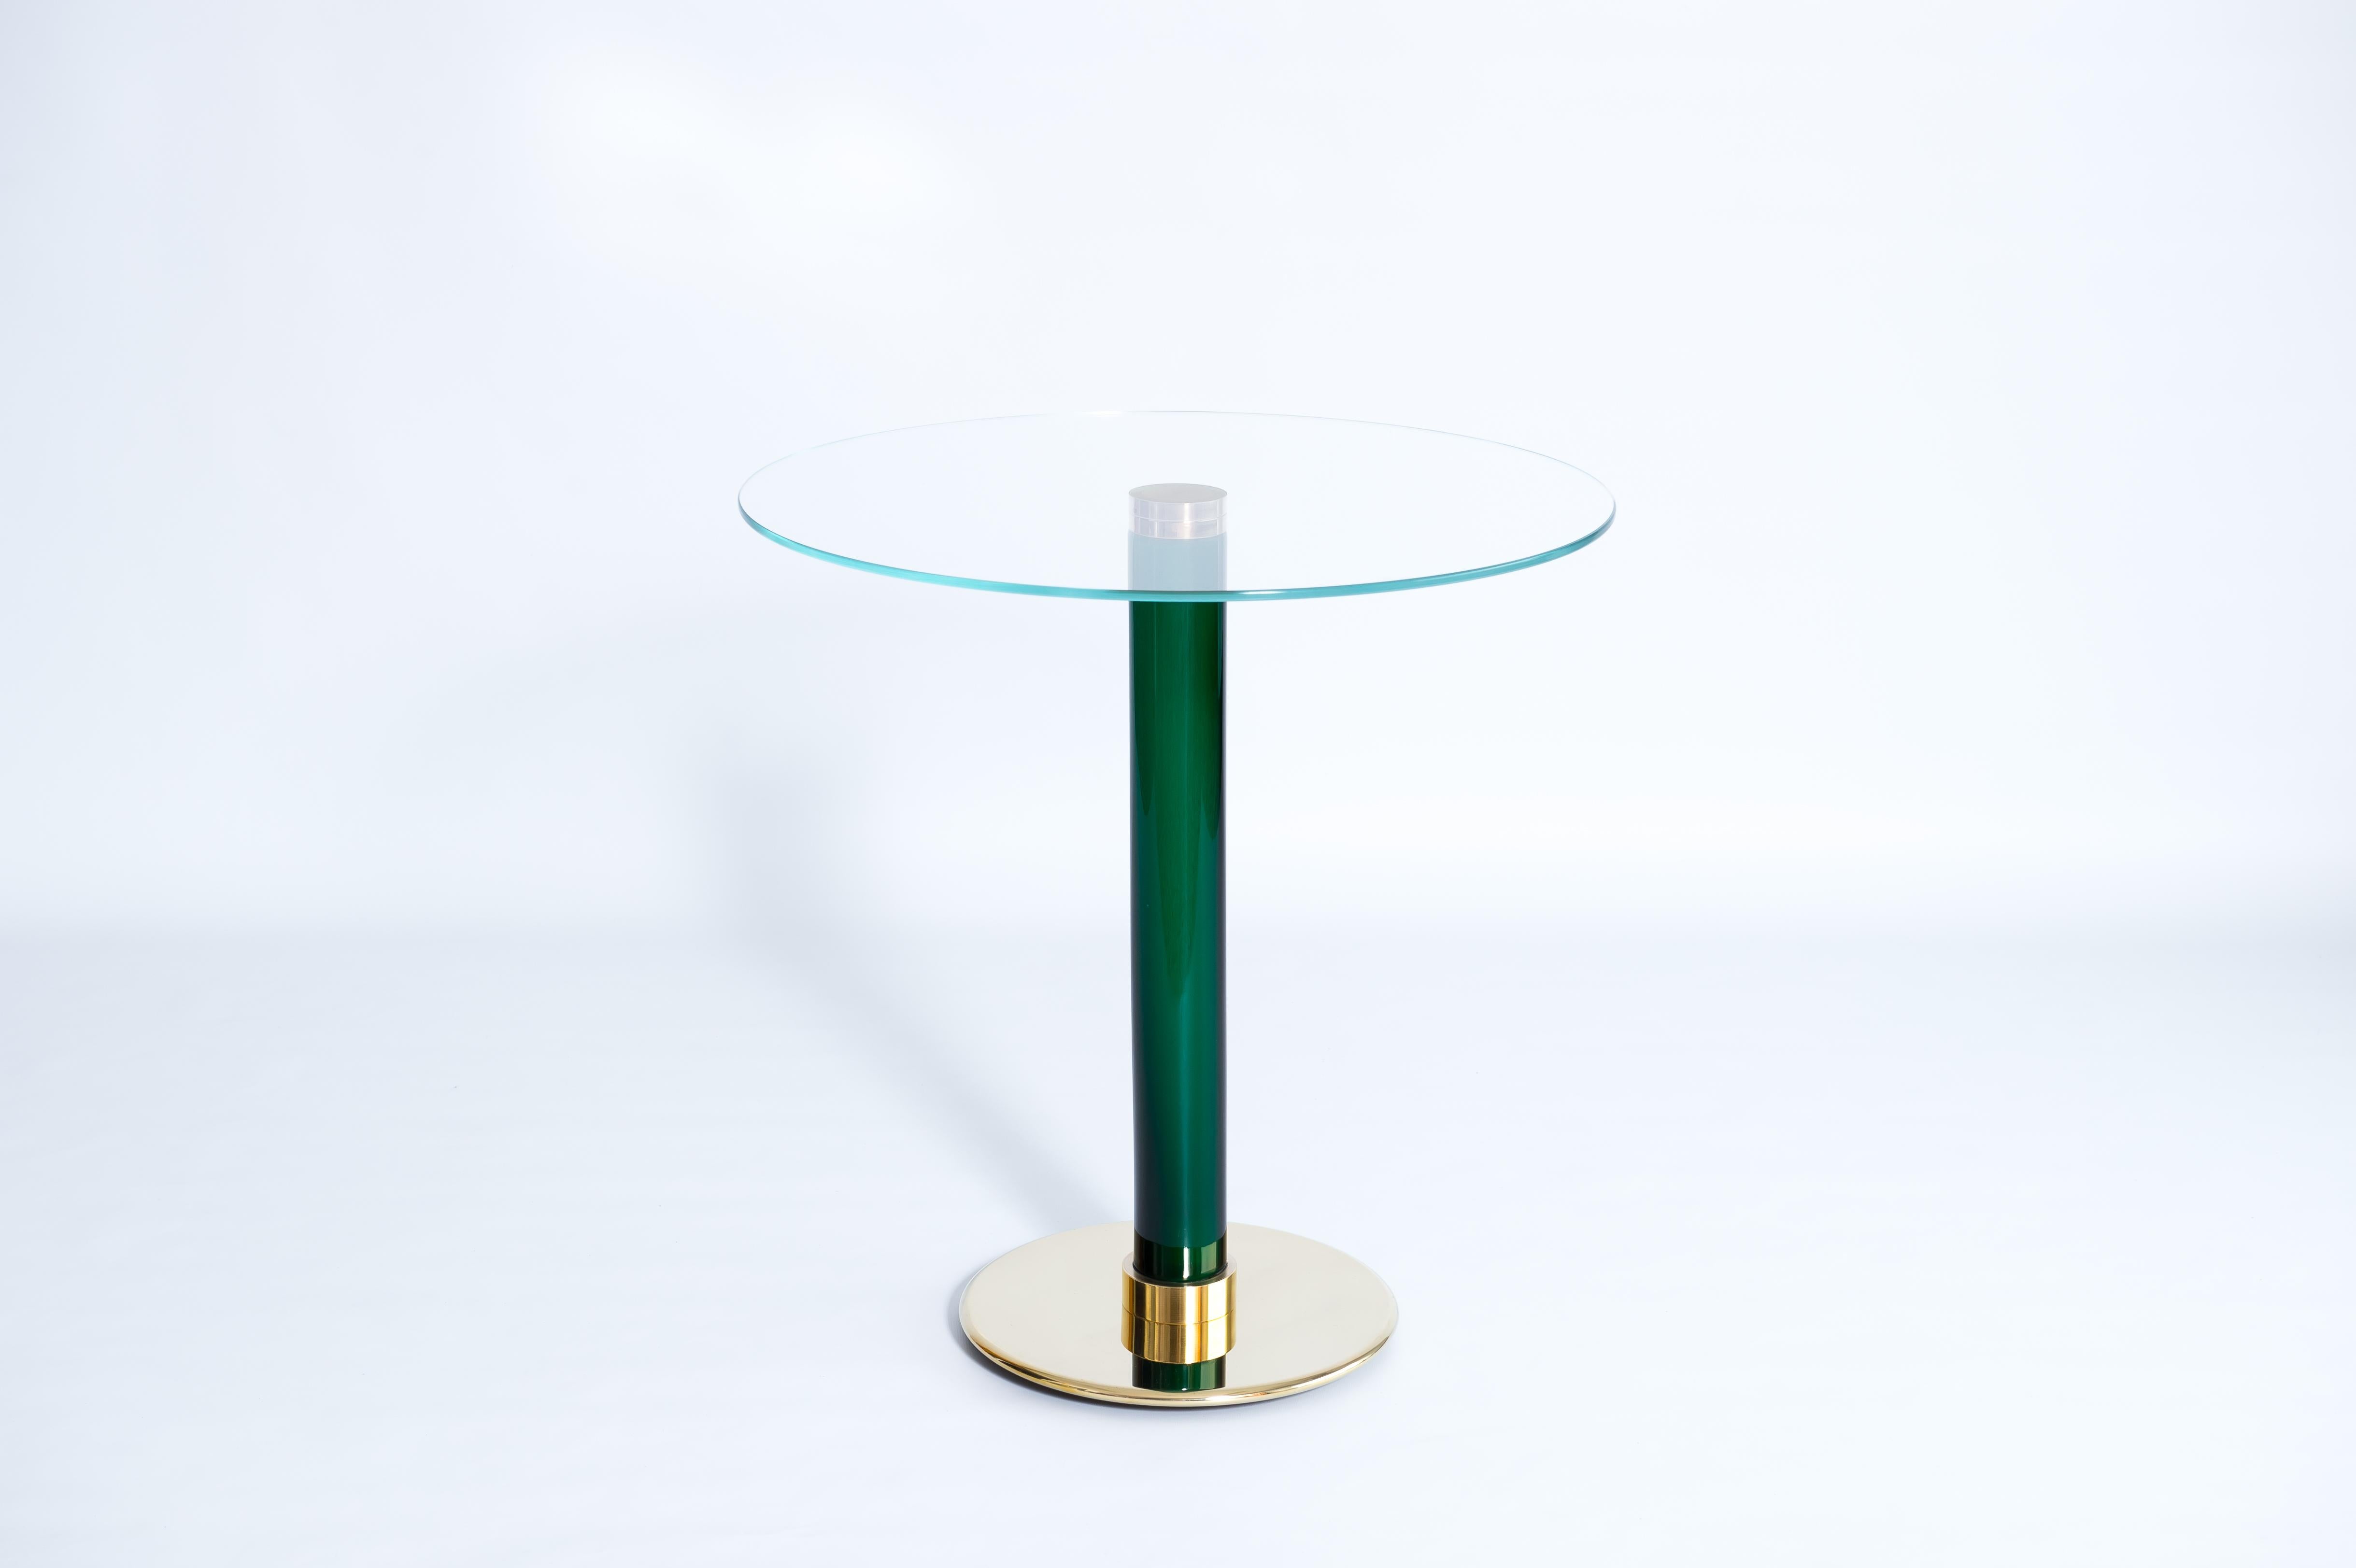 Extraordinary Italian Venetian Cocktail Table in Green Blown Murano Glass, 1990s.
This refined Murano glass table is made of a sturdy brass base, a green glass column and a circular clear glass top. All components were entirely handcrafted in the